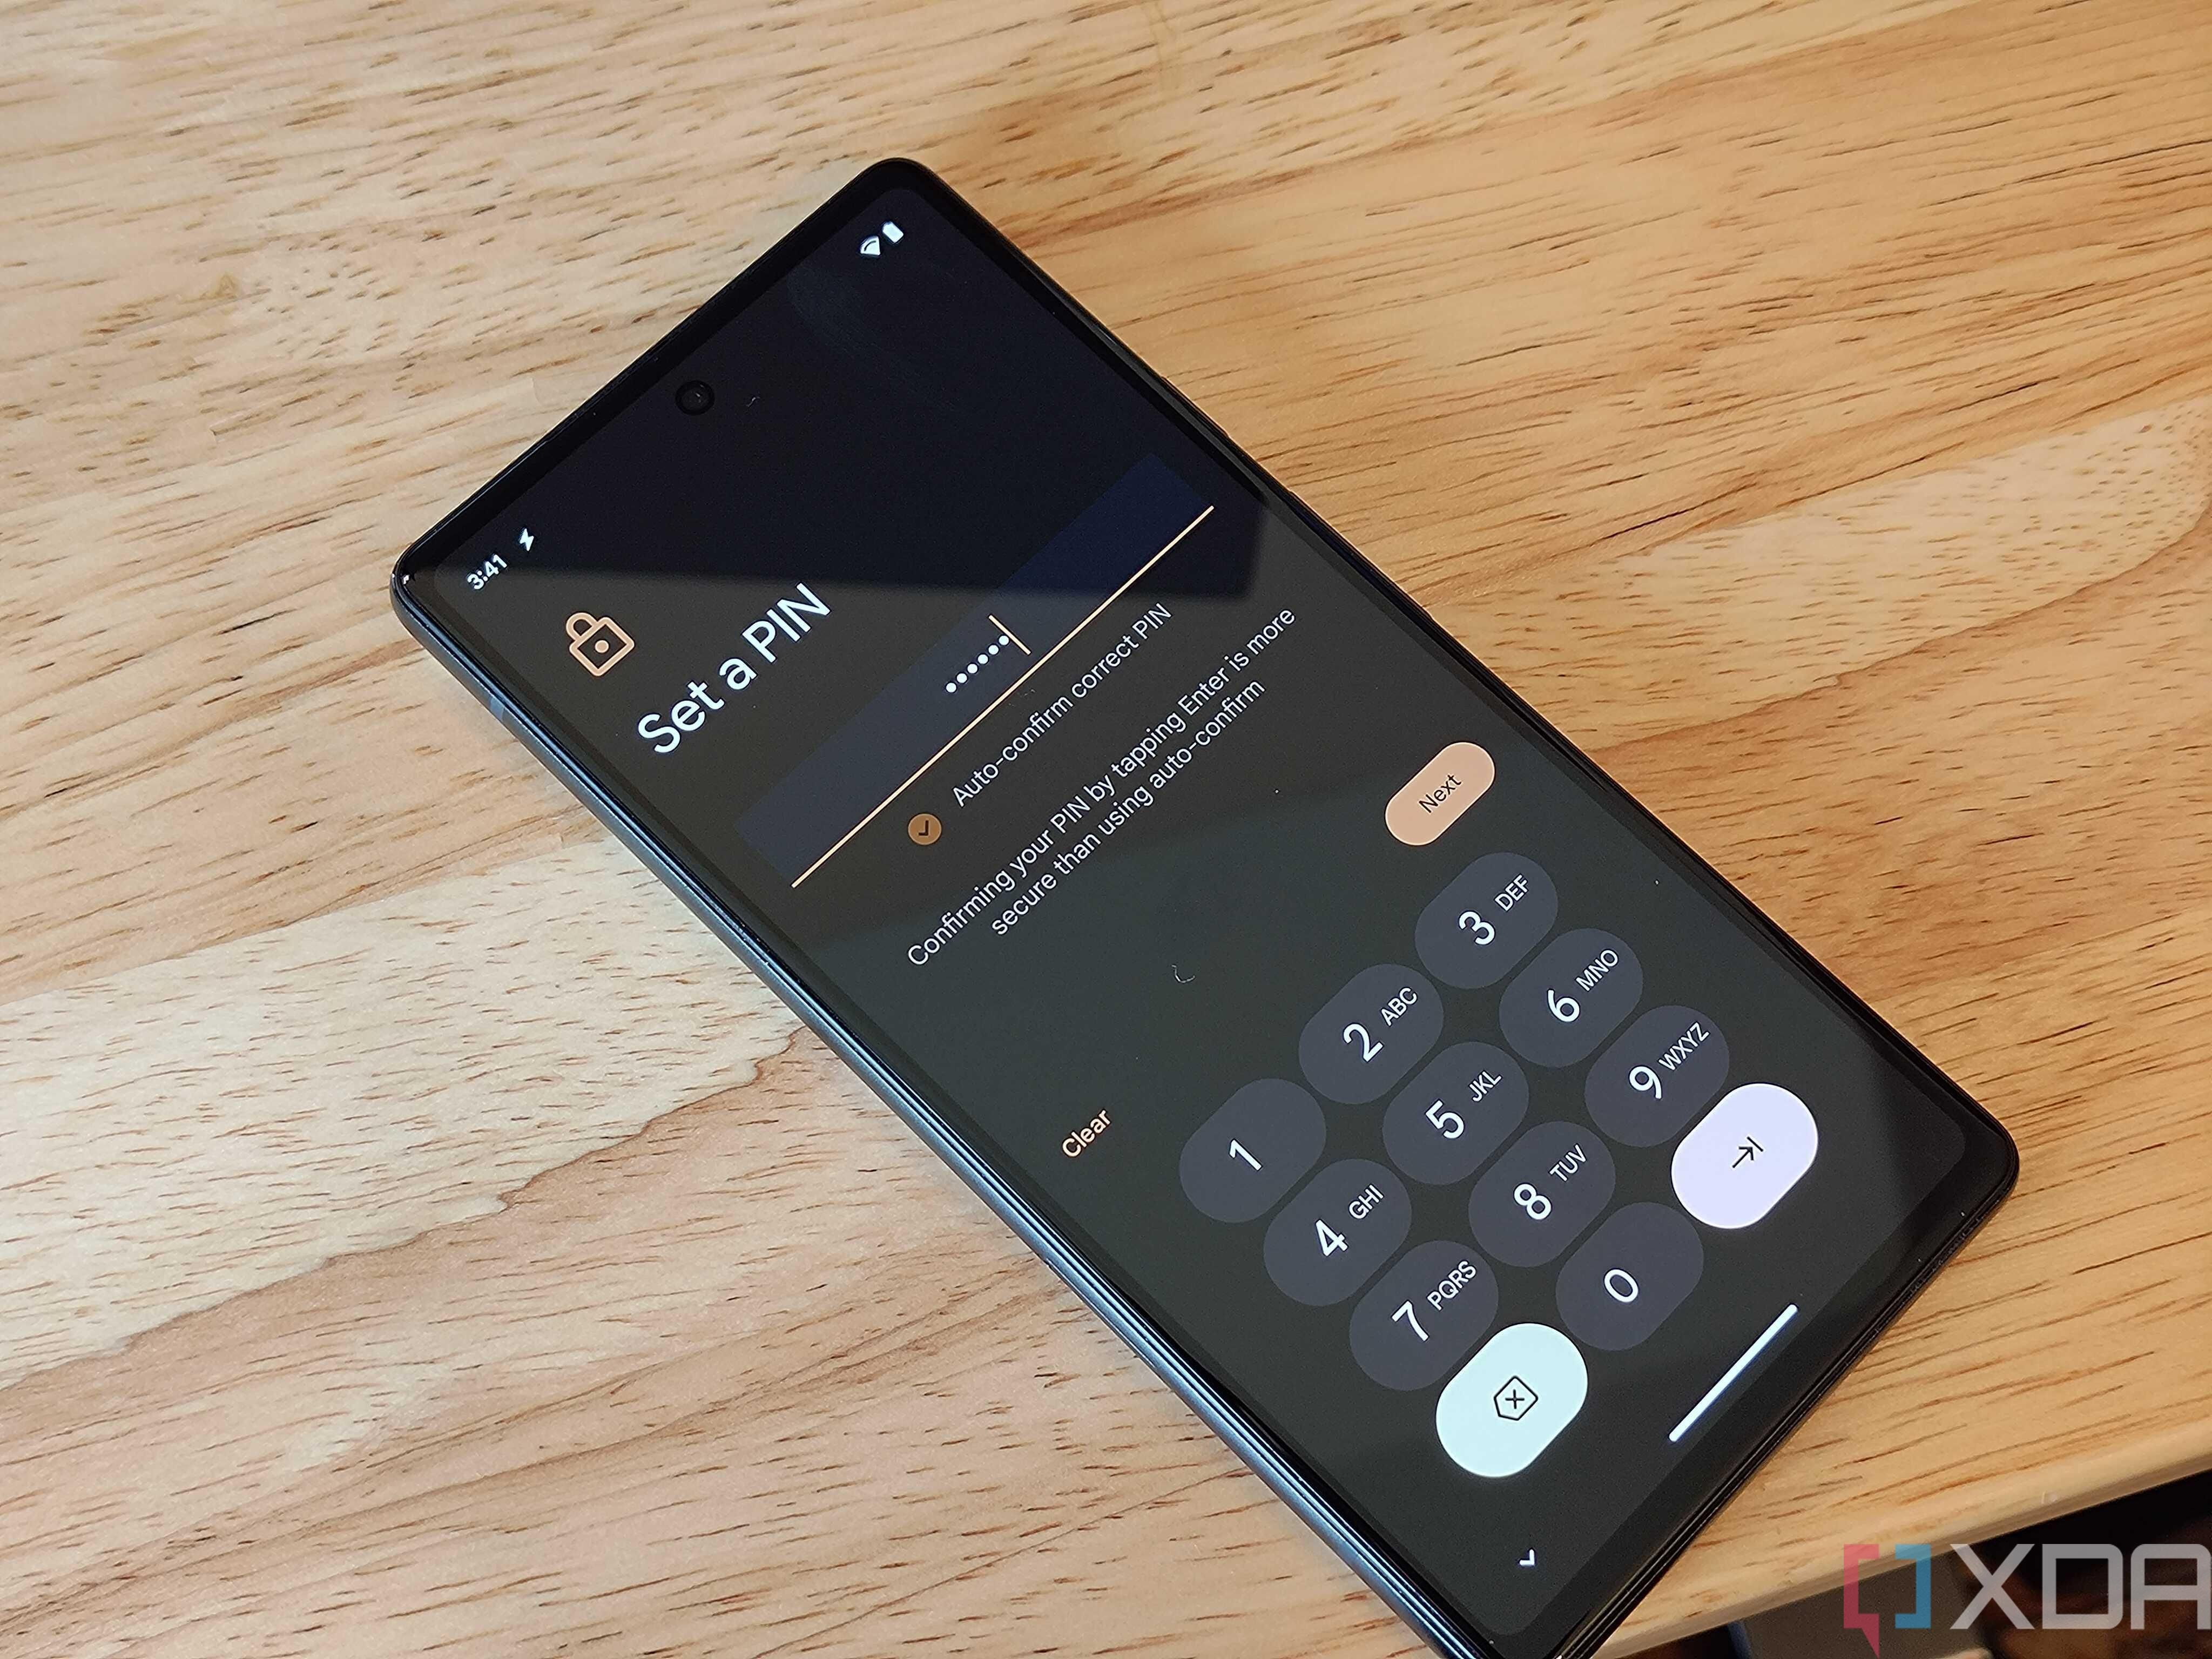 Android 14 may soon support auto-confirming correct PINs so you